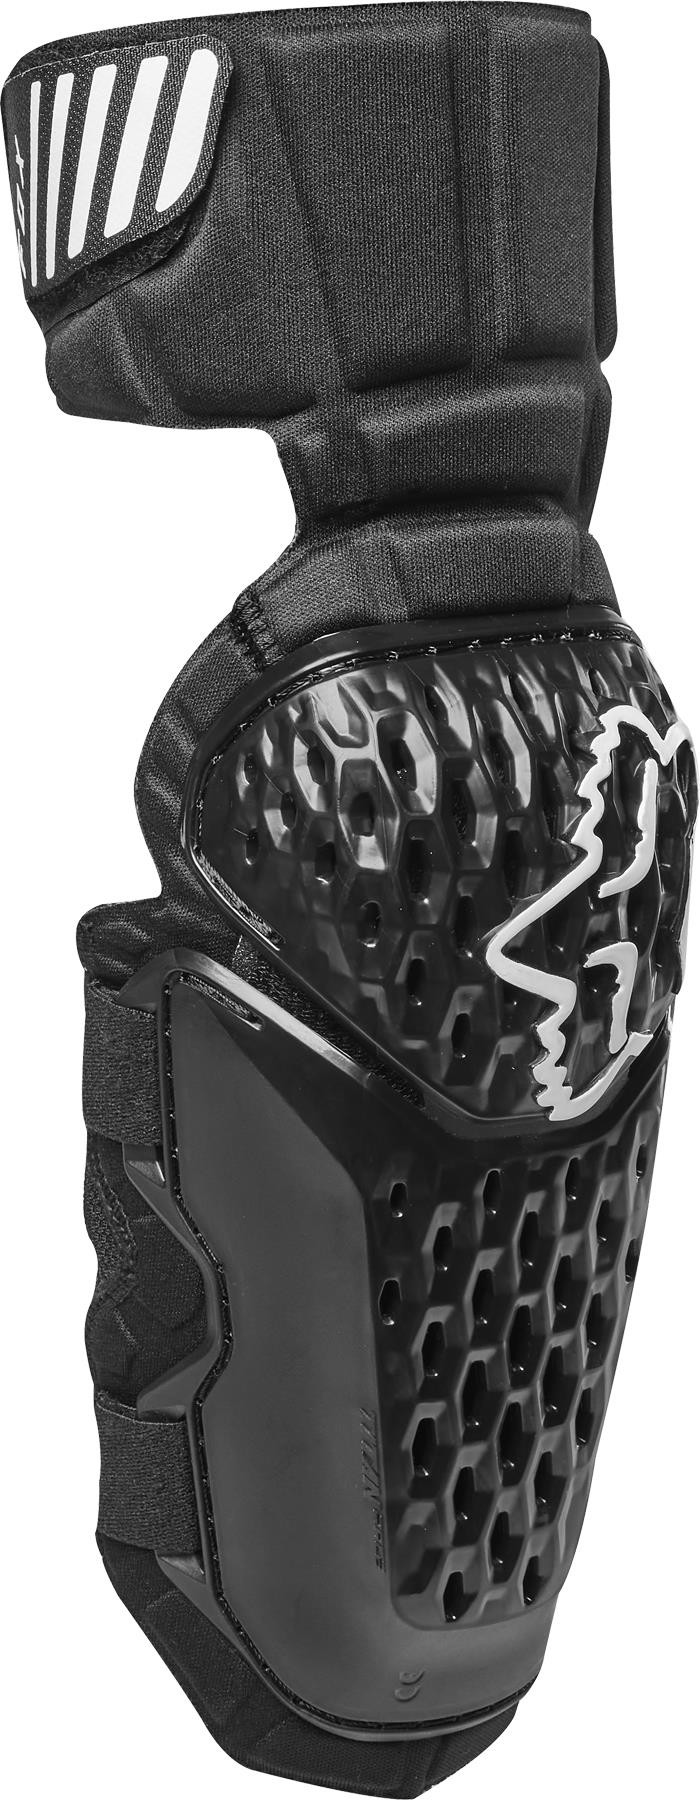 Titan Race Youth MTB Elbow Guards image 0